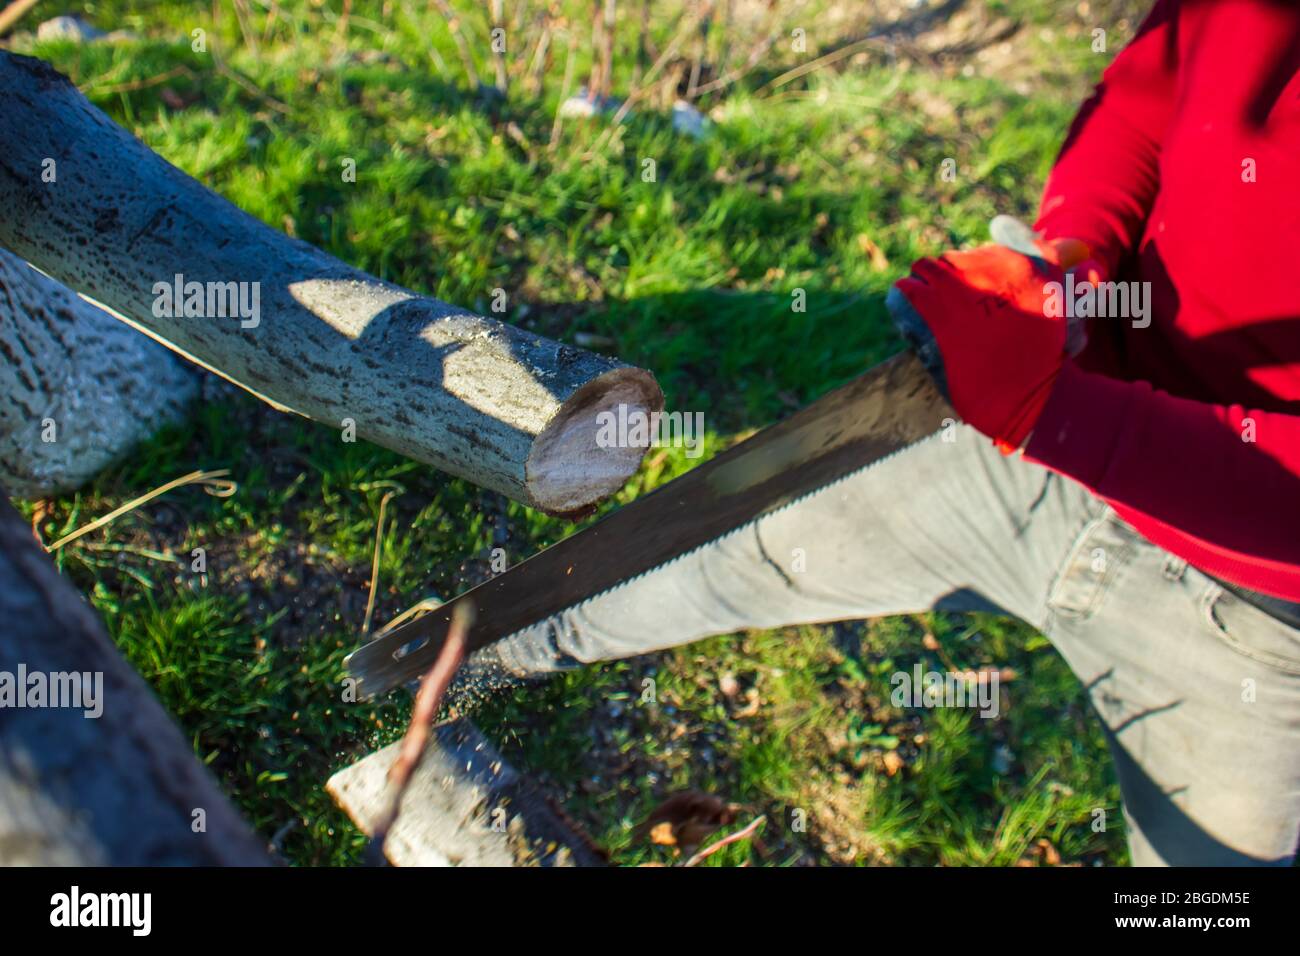 the man is cutting a tree with the saw, man working in a garden on tree Stock Photo